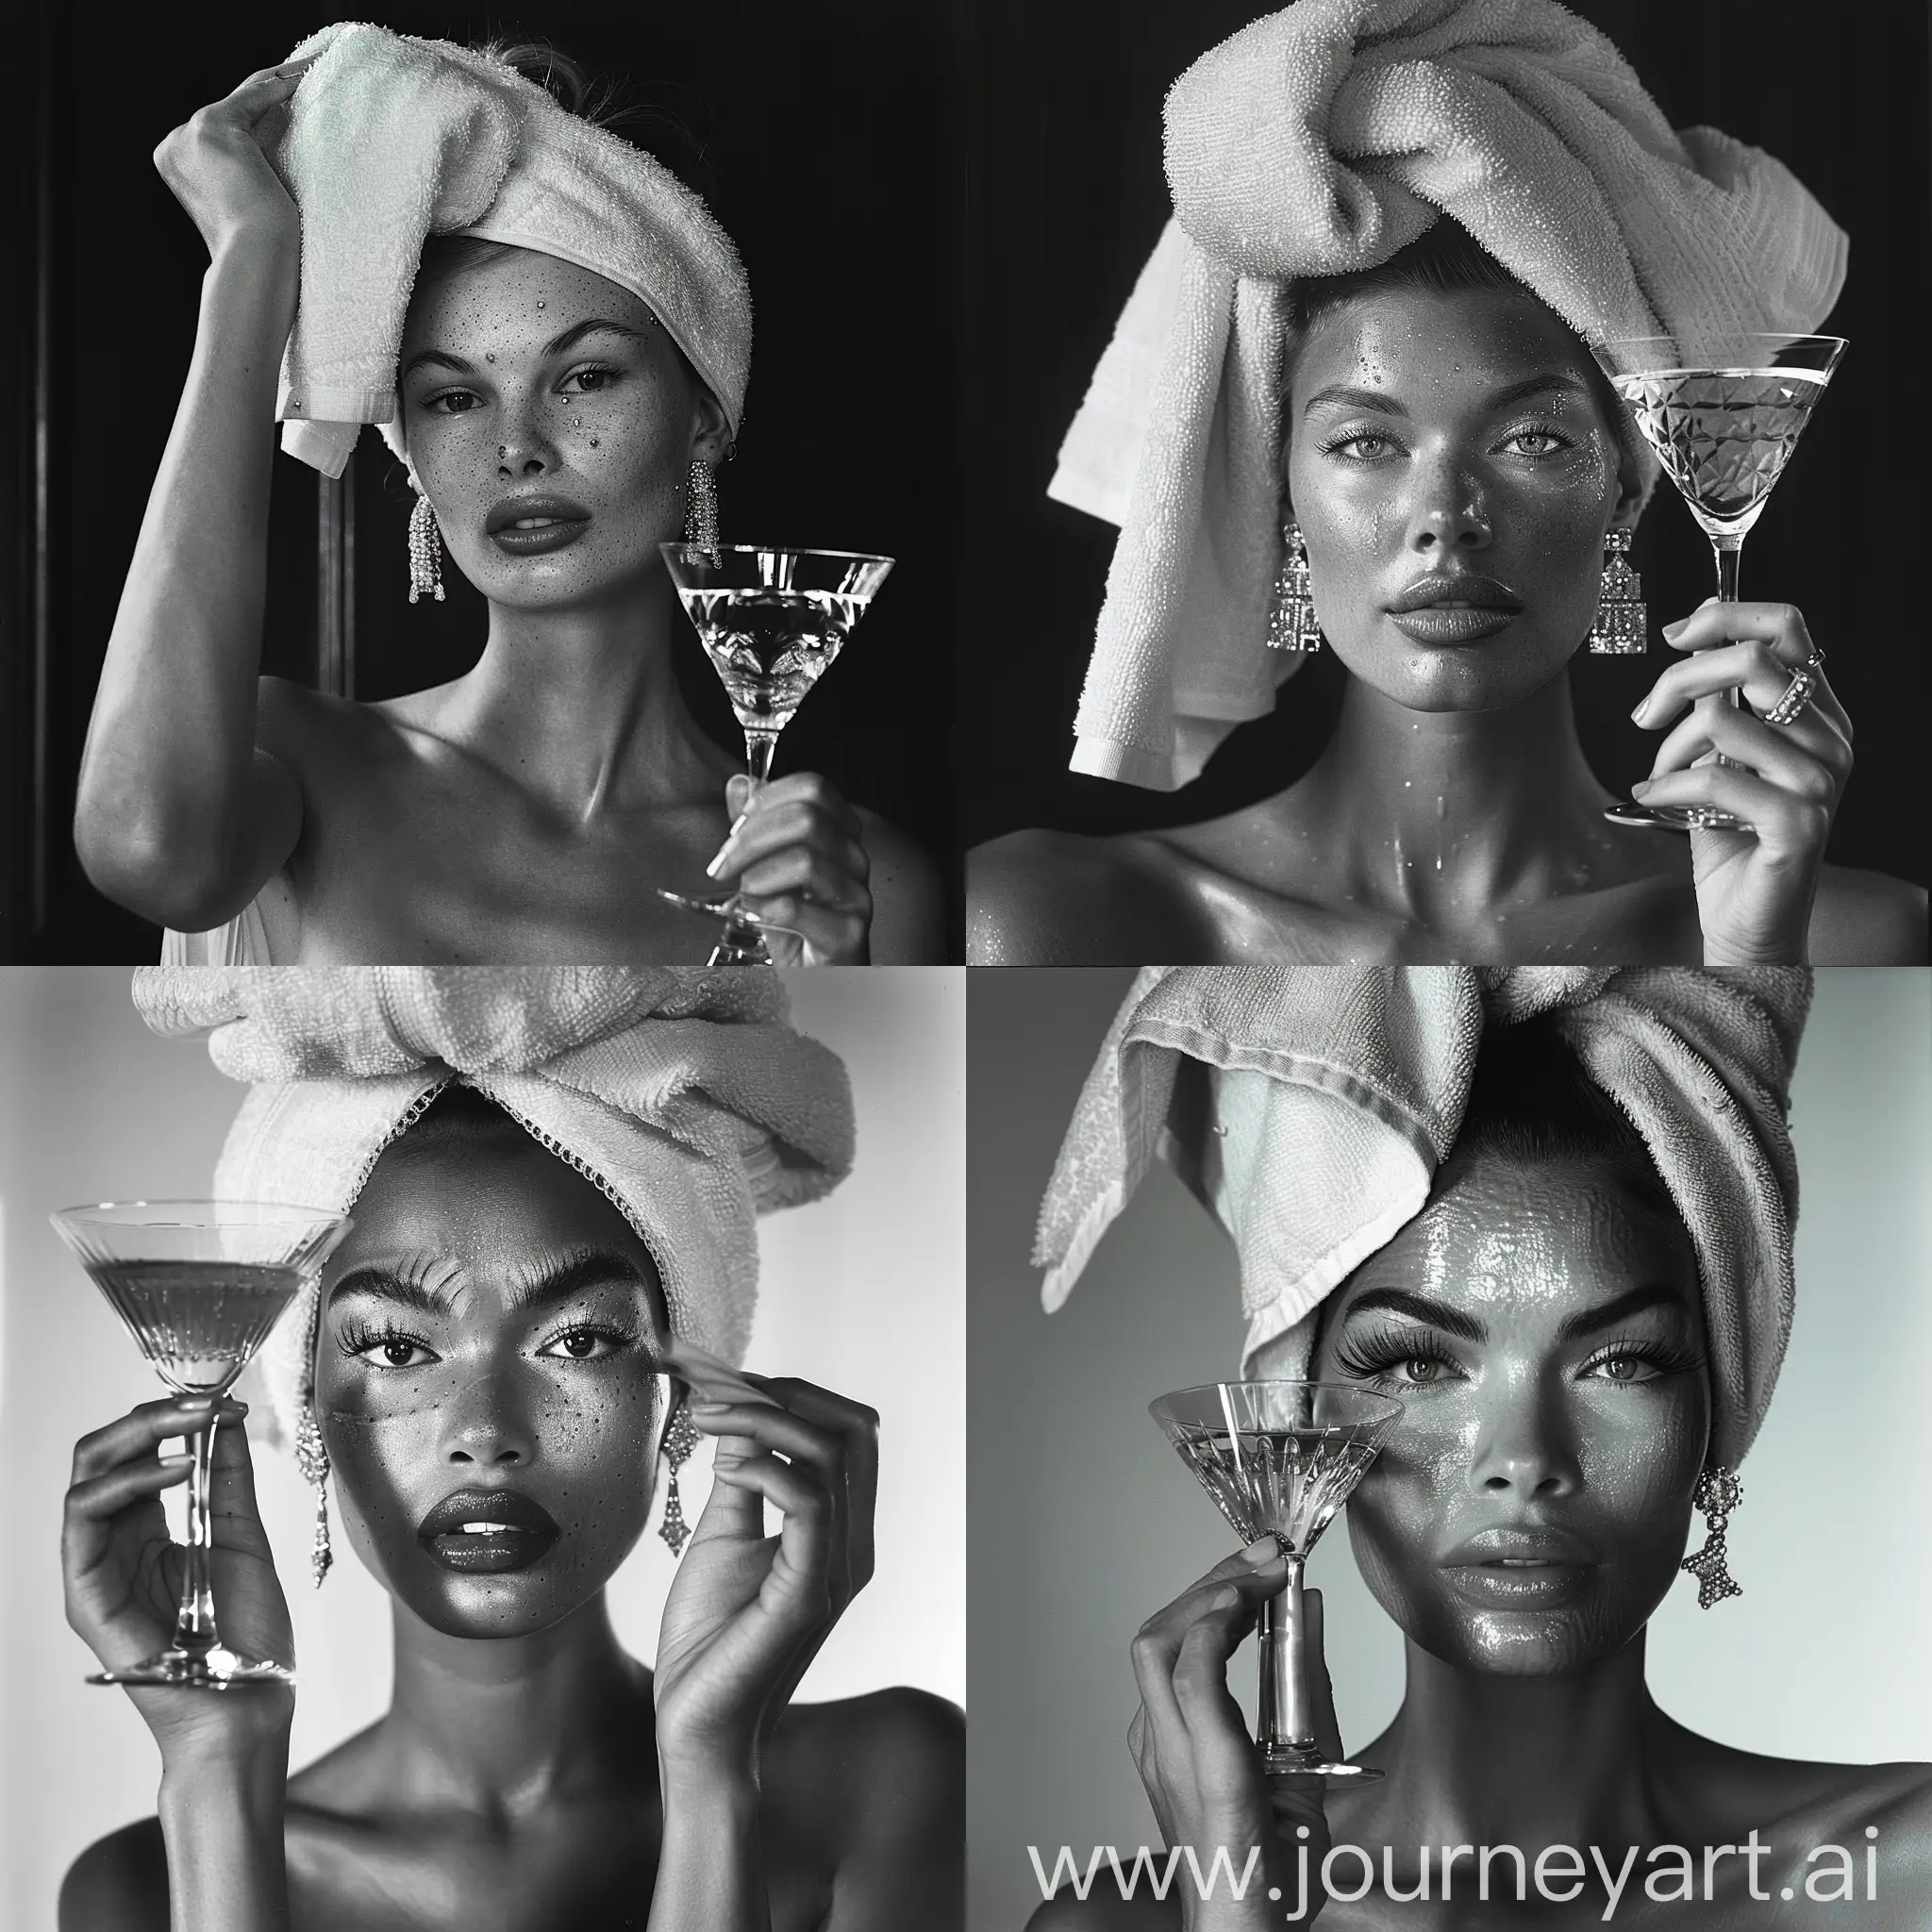 Vintage-Vogue-Photoshoot-90s-Icon-with-Towel-Headwrap-and-Martini-Glass